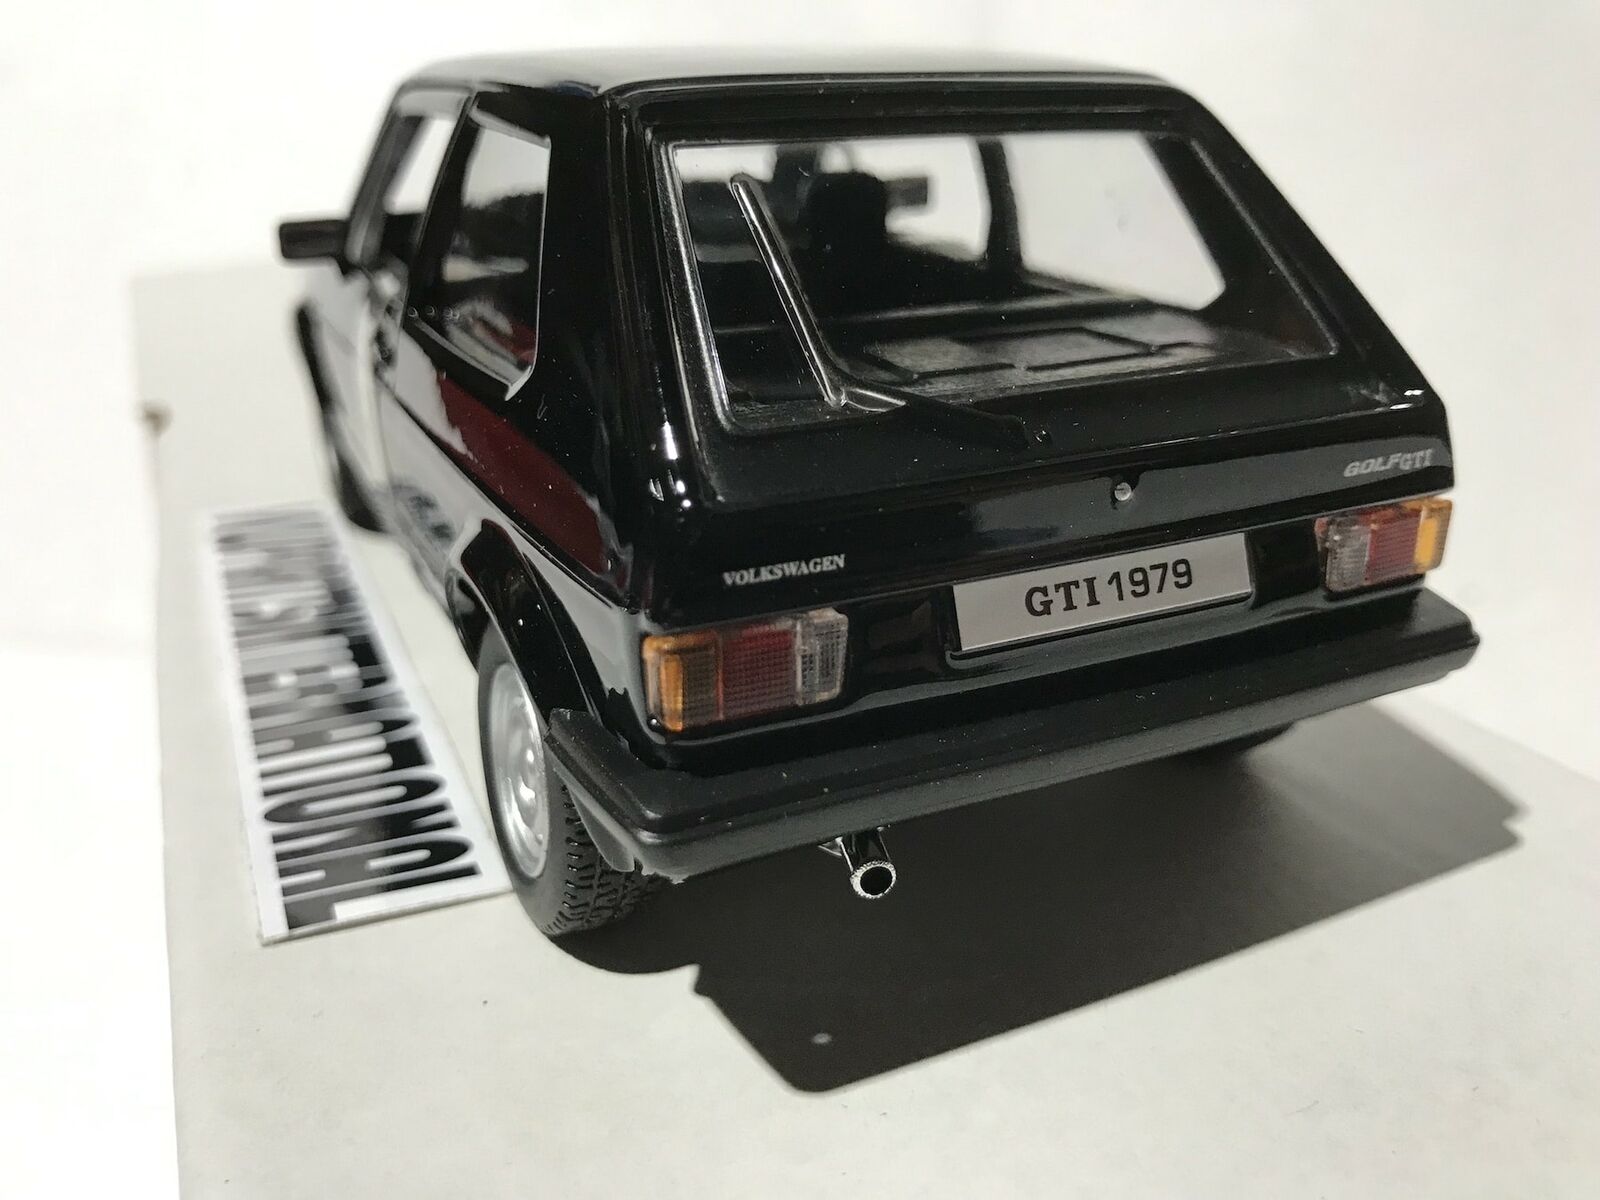 VW Golf MK1 GTI 1:24 Scale Model Car Toy Kids Childs Dads Christmas Gift Present